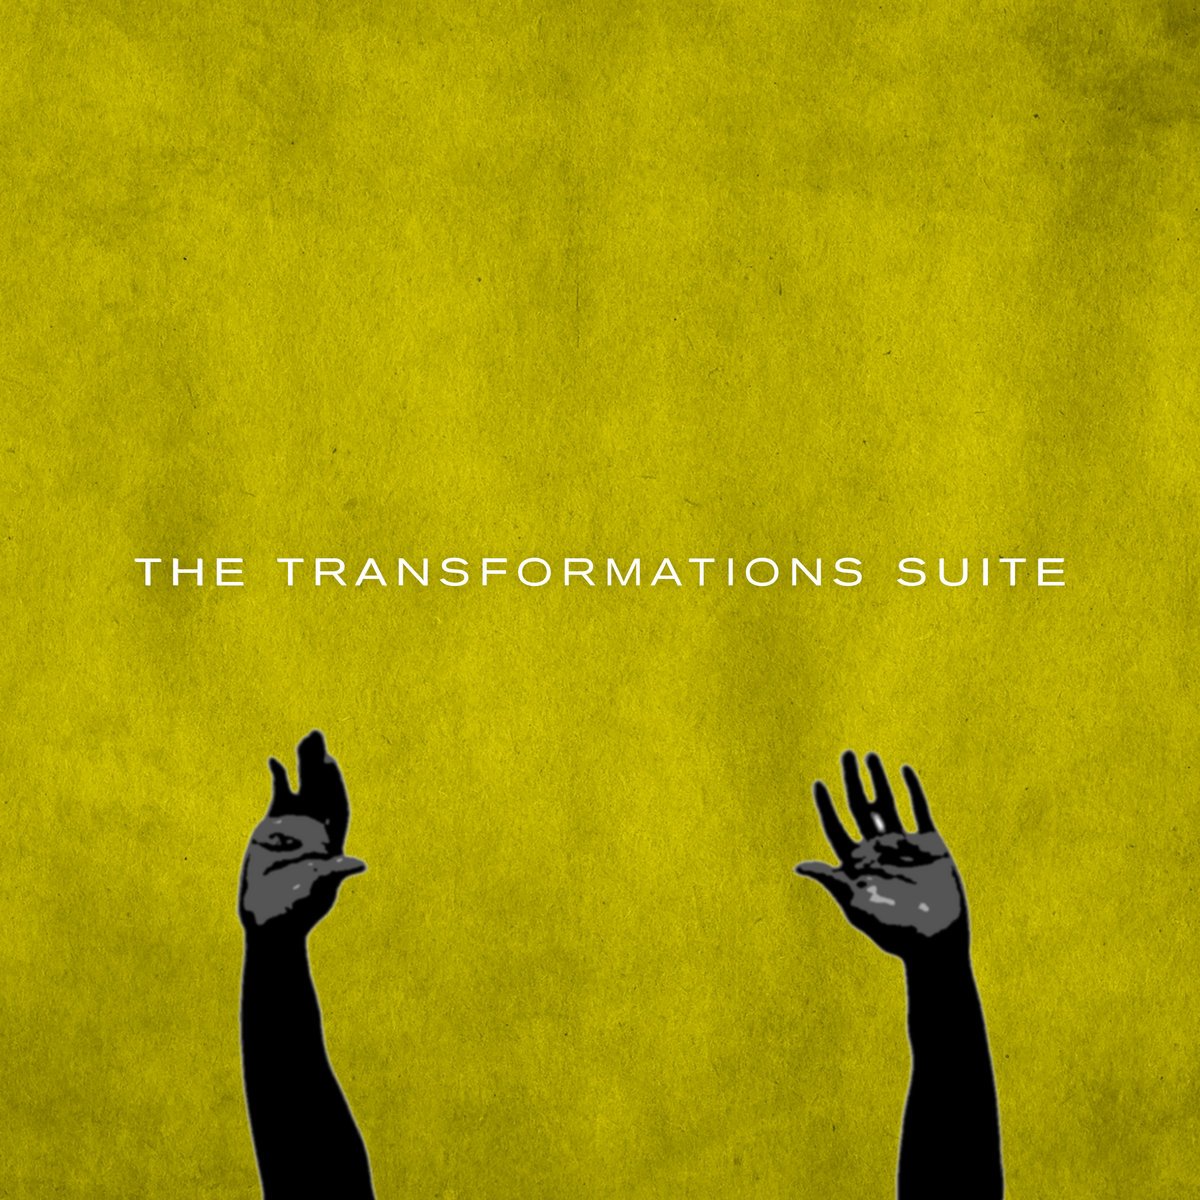 The Transformations Suite, 2016